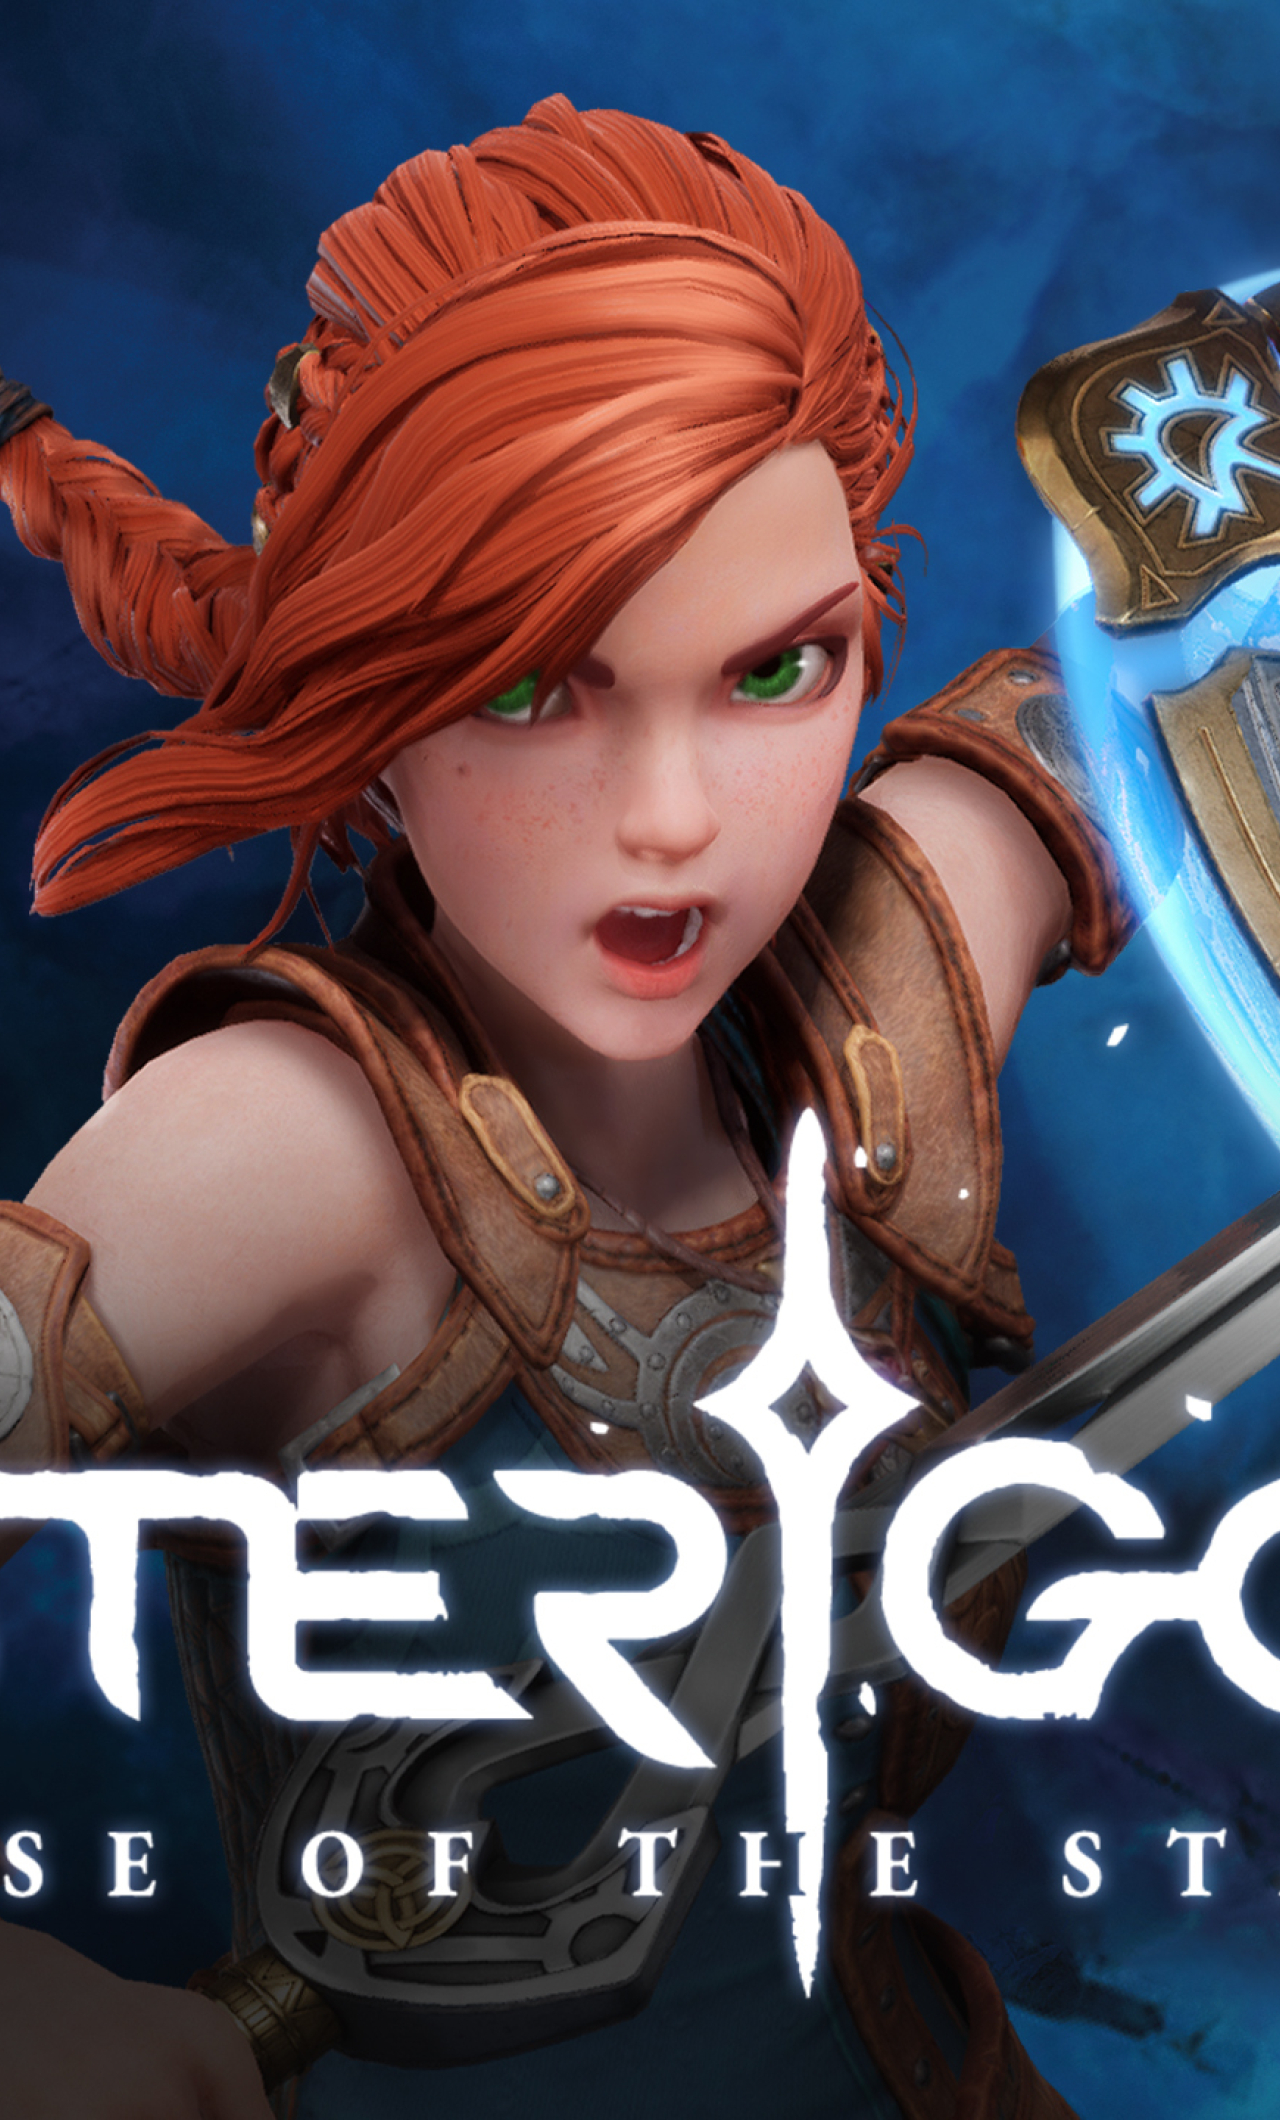 for apple download Asterigos: Curse of the Stars